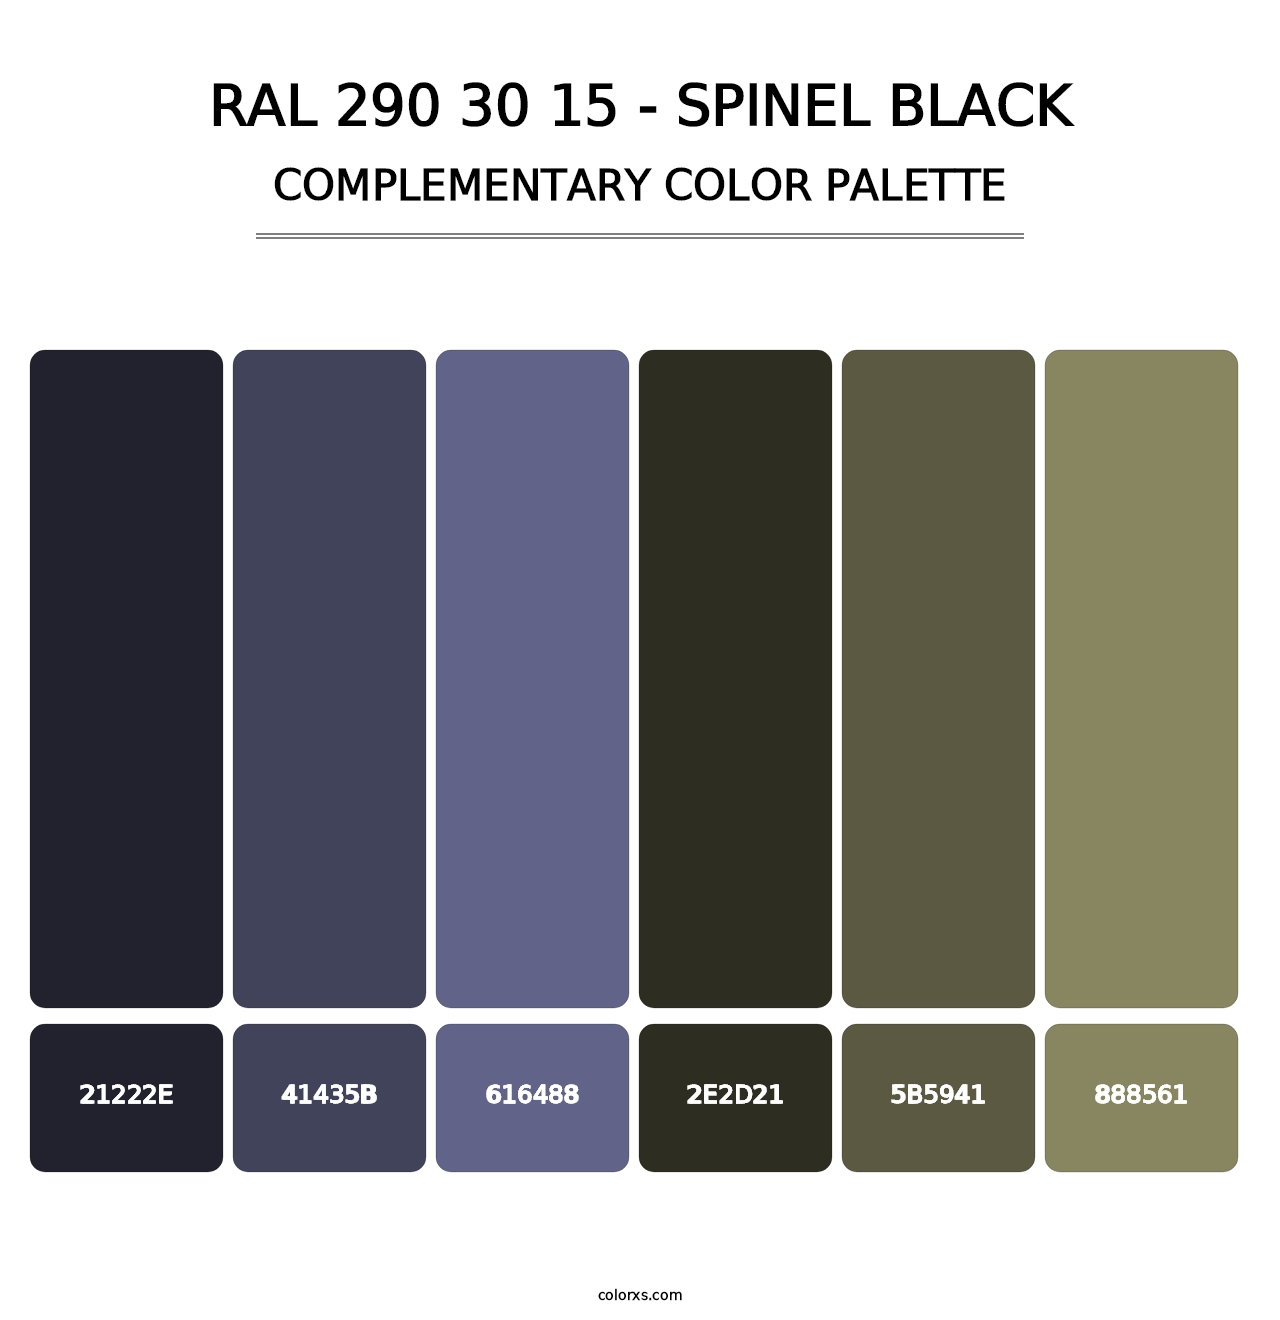 RAL 290 30 15 - Spinel Black - Complementary Color Palette